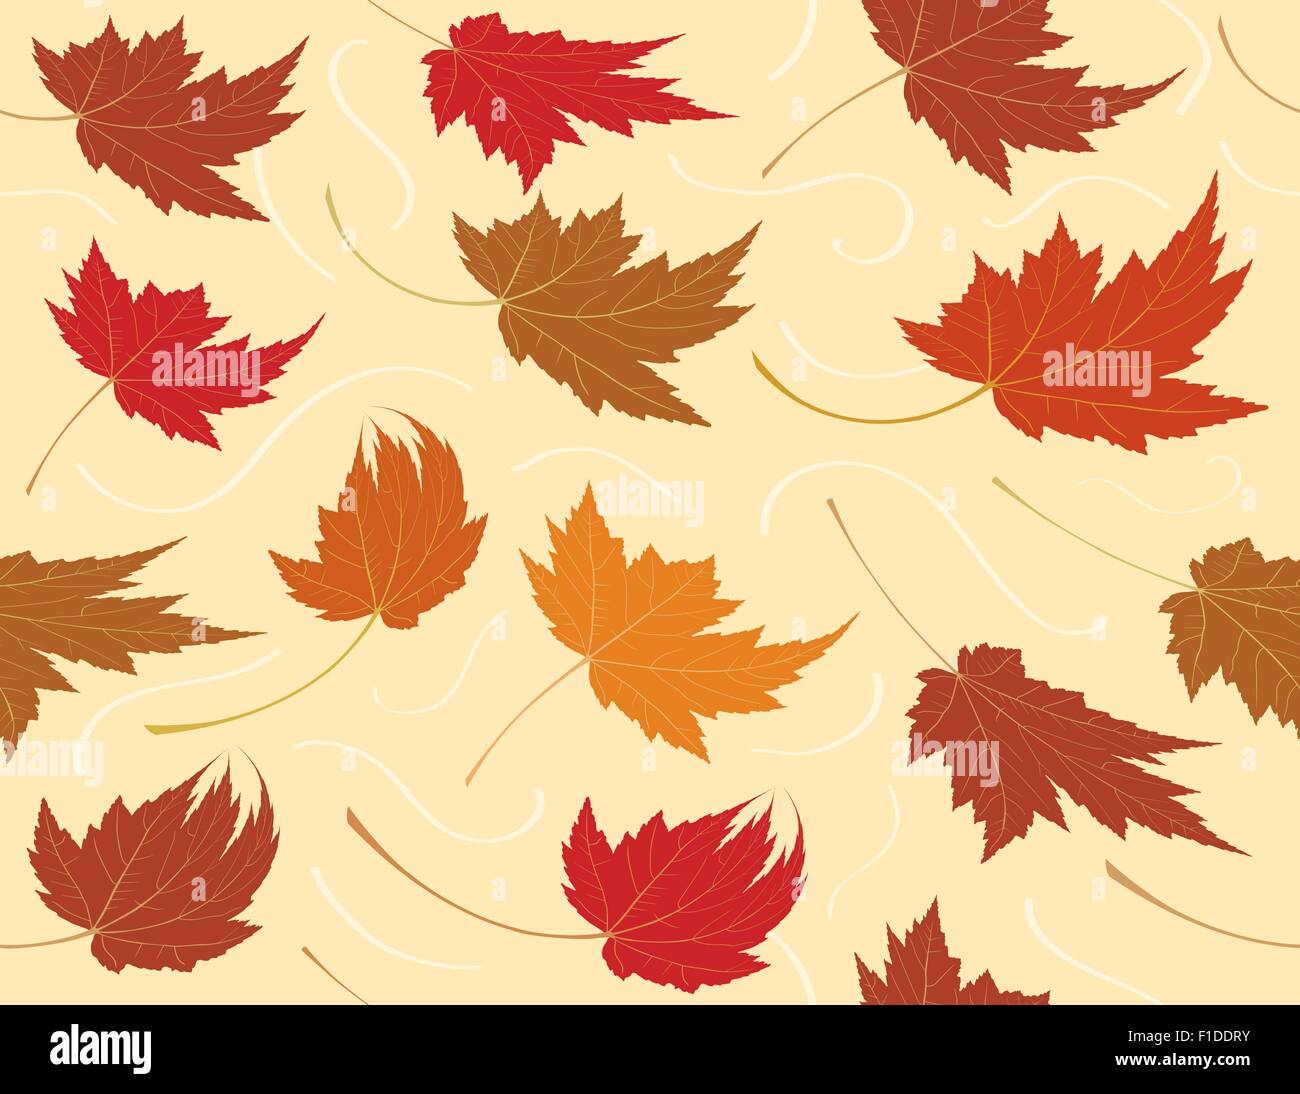 Seamless Repeating Fall Leaf Background Stock Vector Image & Art - Alamy